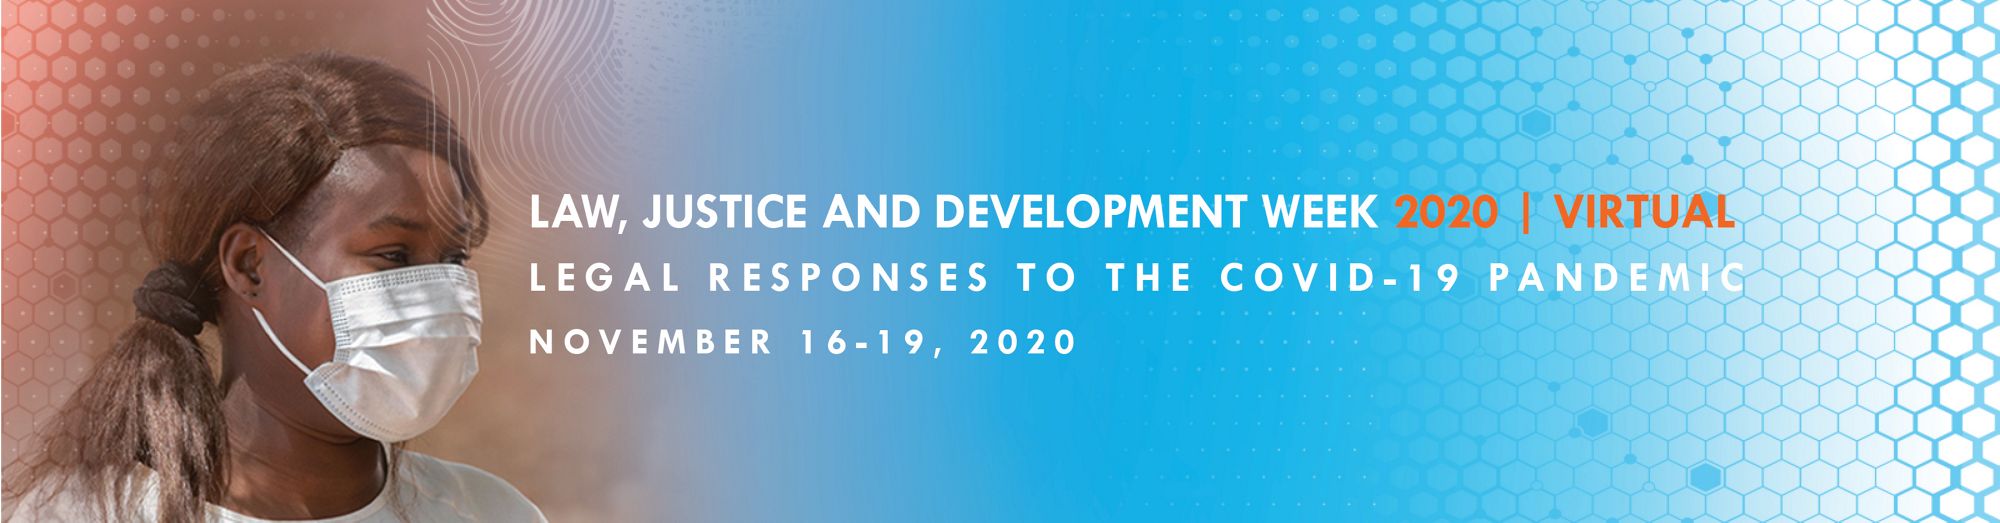 Law, Justice and Development Week 2020